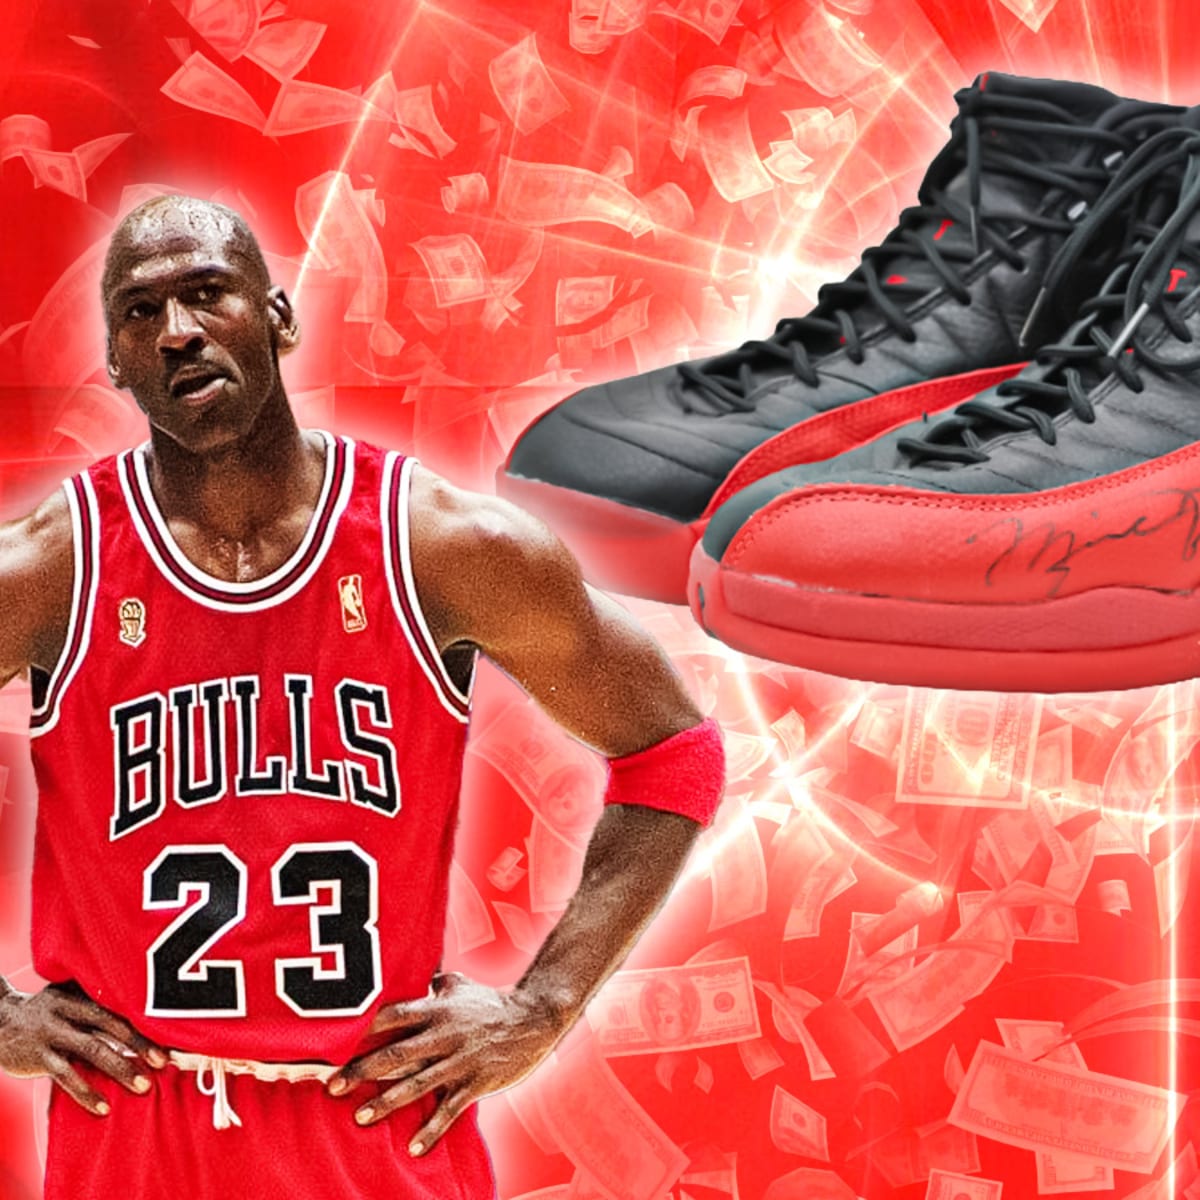 Michael Jordan's Infamous Flu Game Was Actually Caused by Bad Pizza